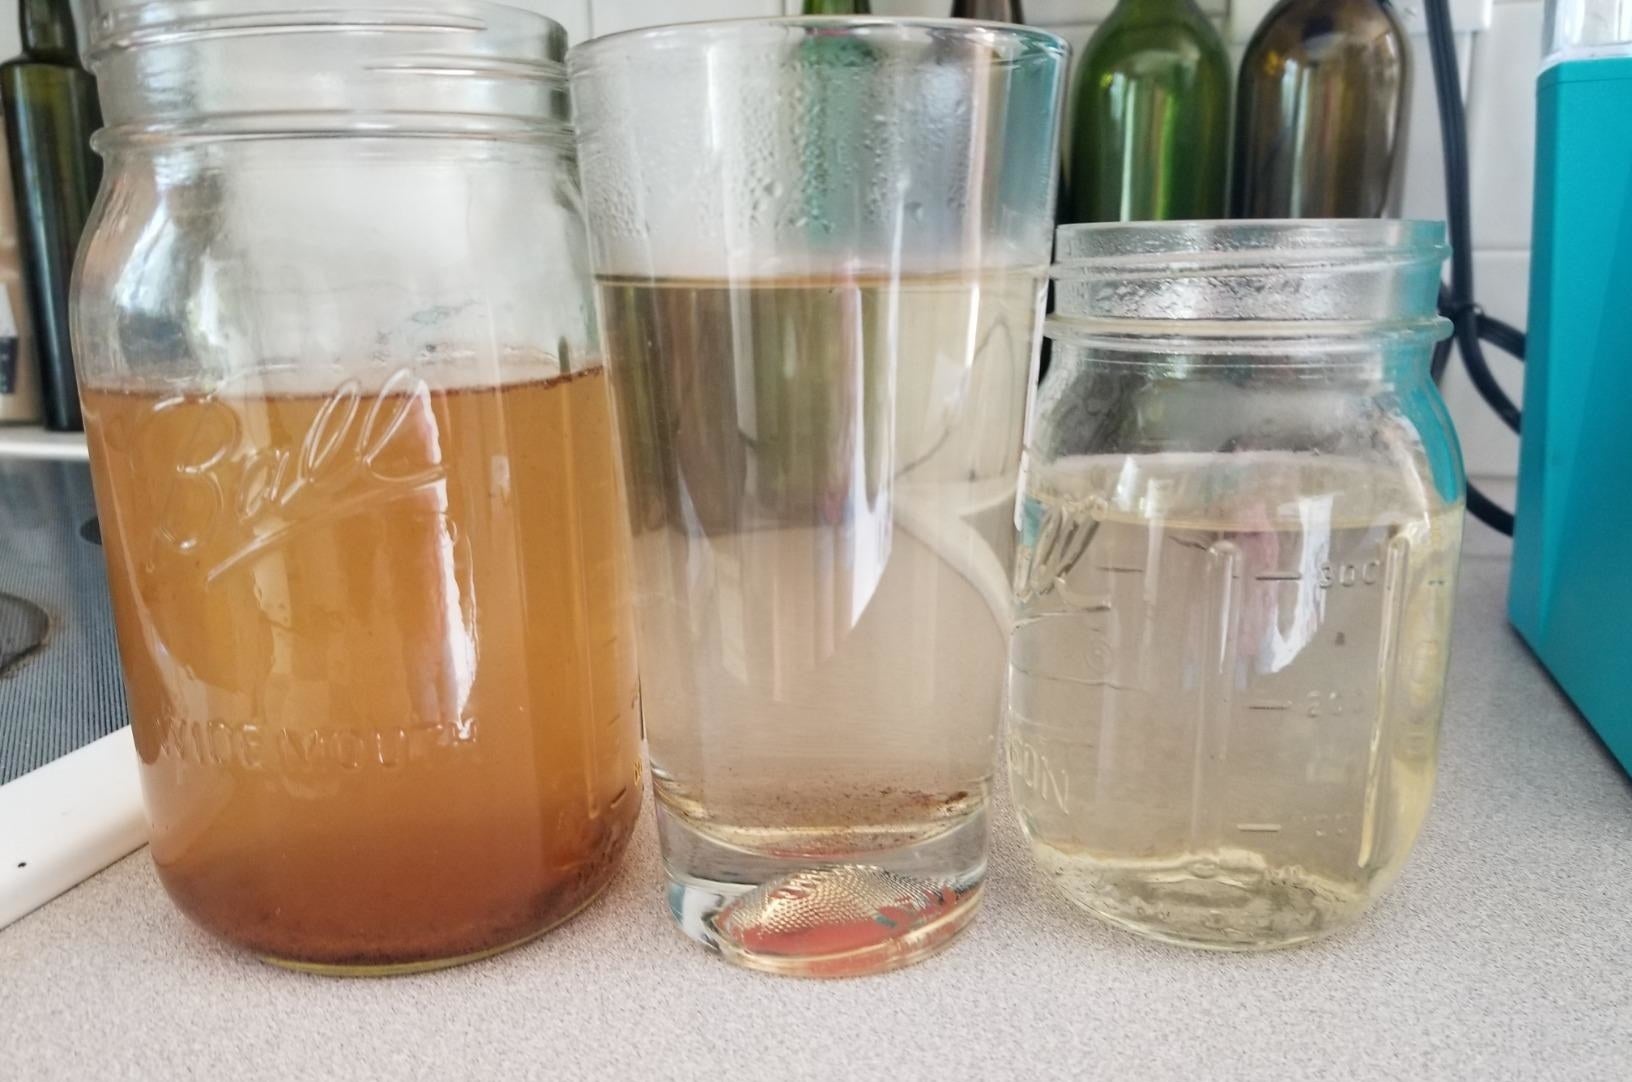 A glass on the left filled with brown water, a glass in the middle filled with cloudy water, and a glass on the right filled with clean water 